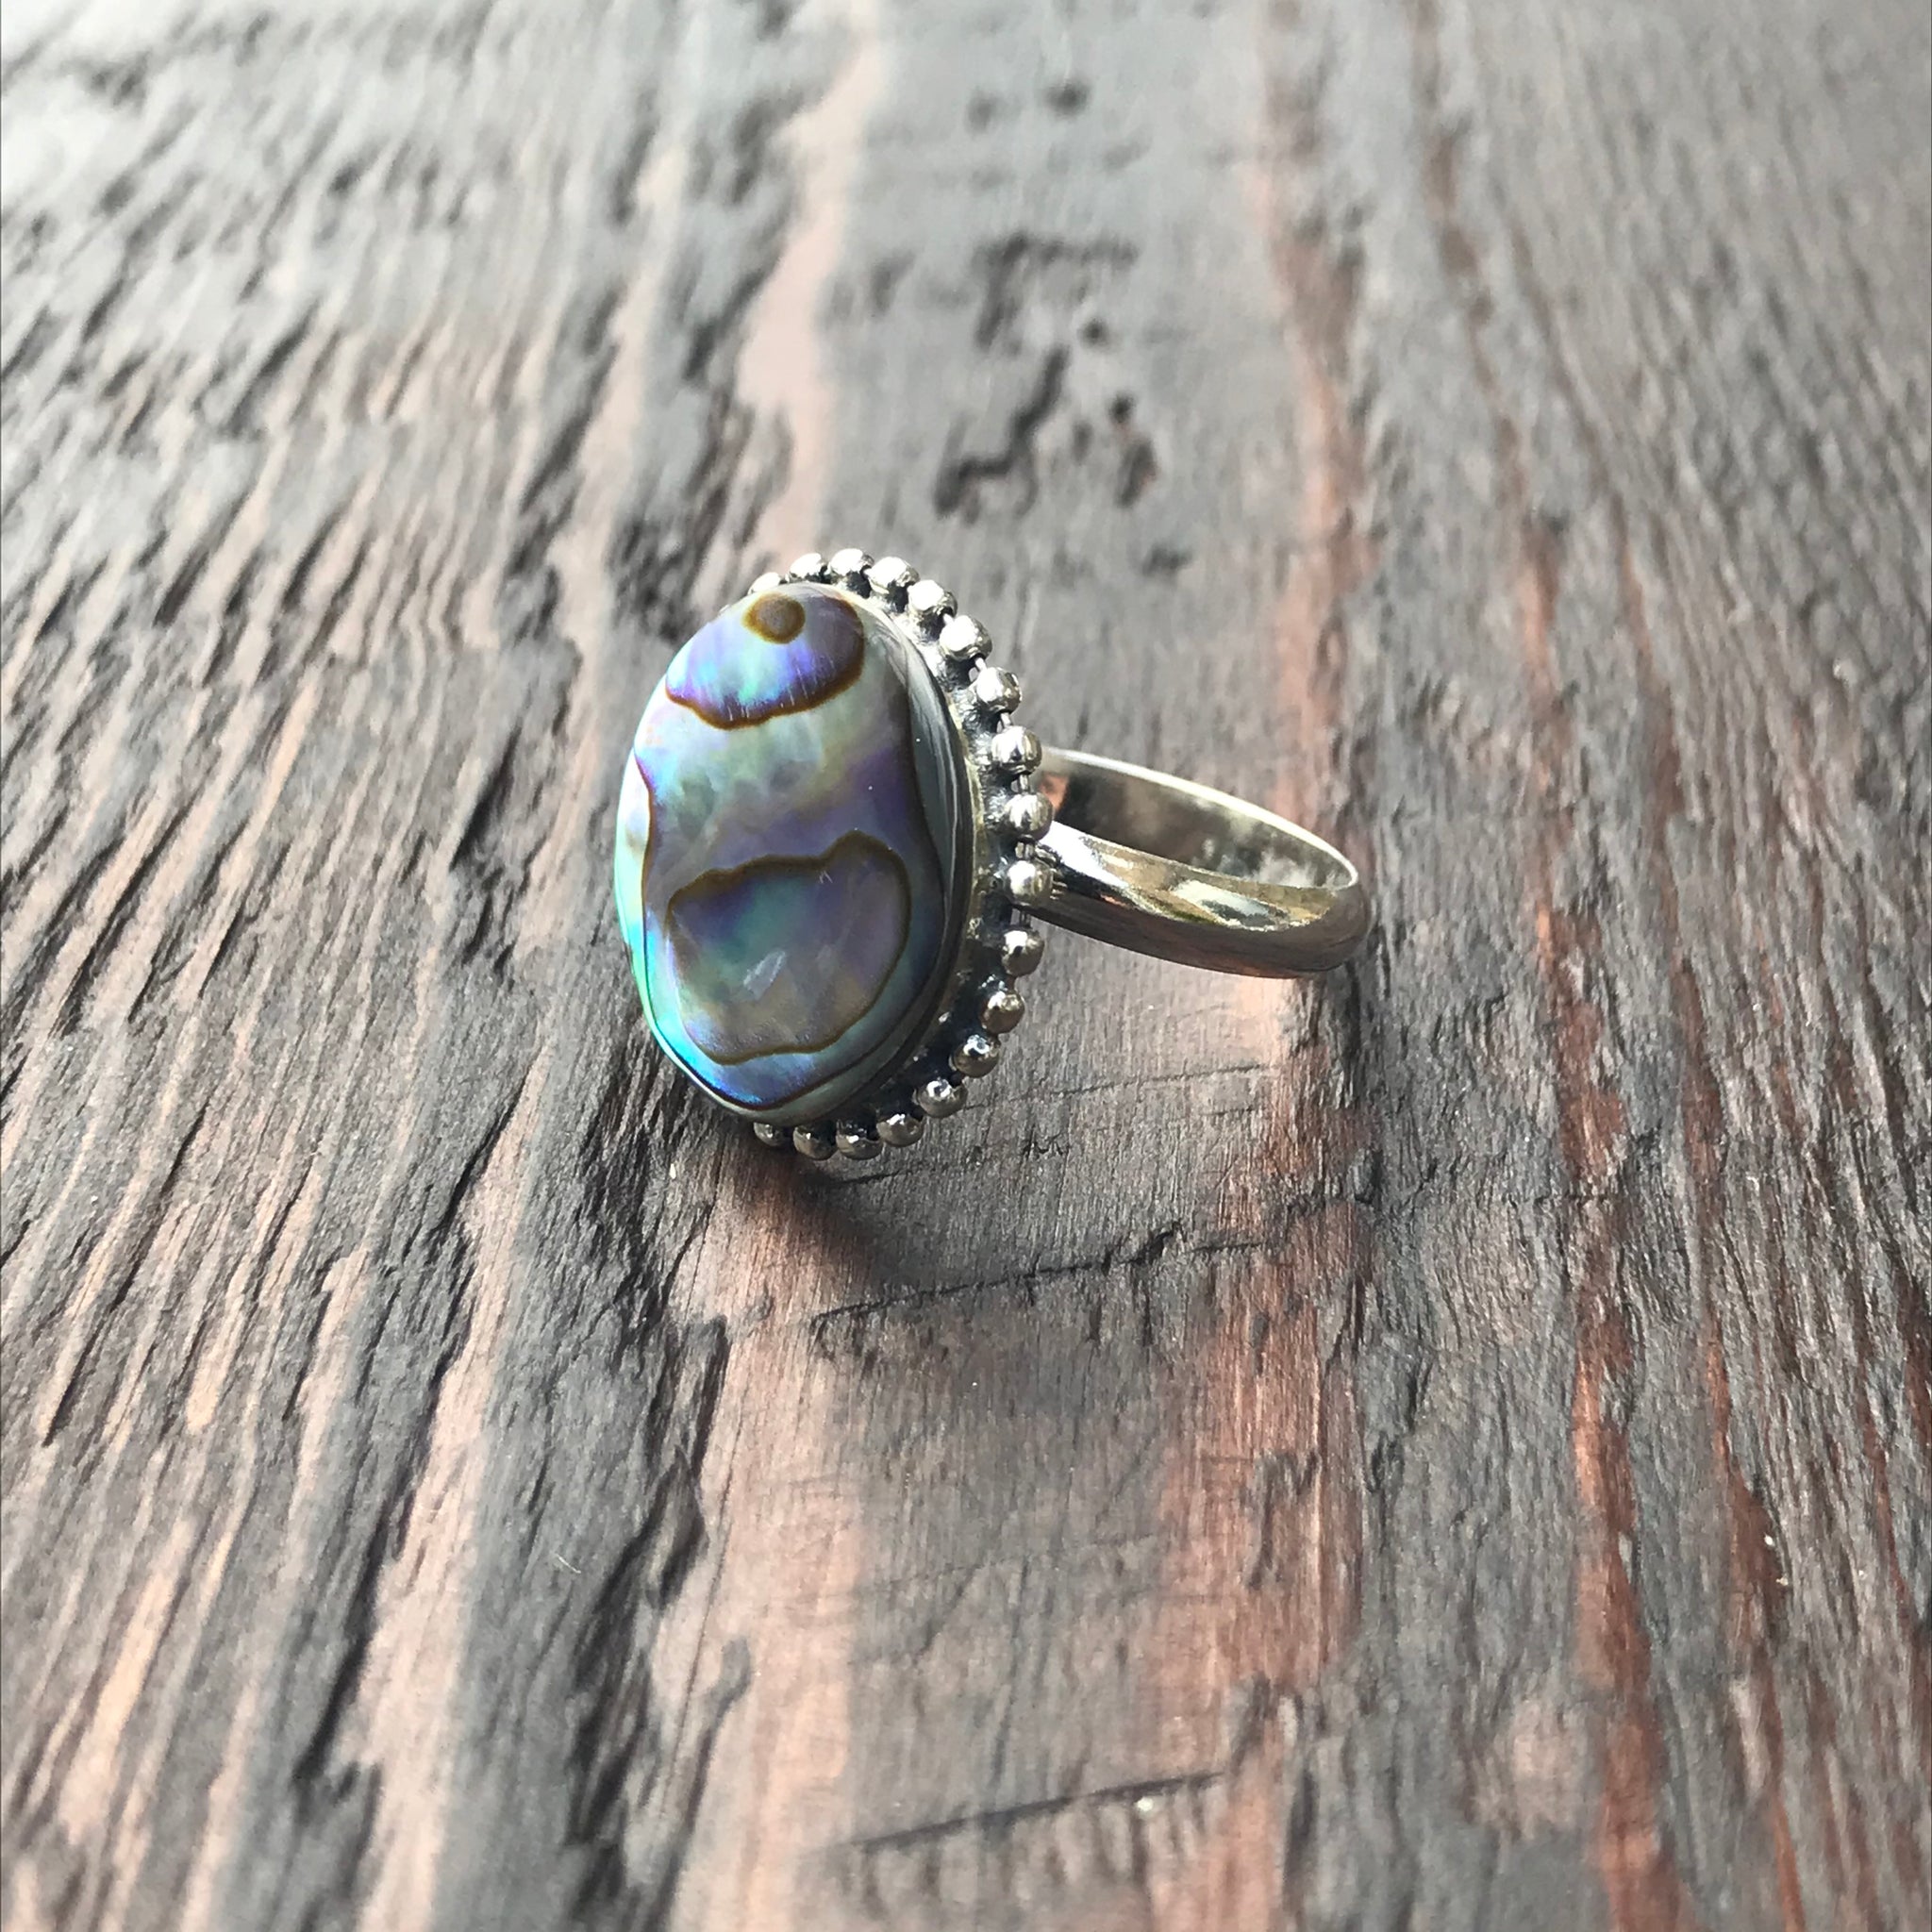 Round Abalone Shell Sterling Silver Ring With Ethnic Bead - Adjustable